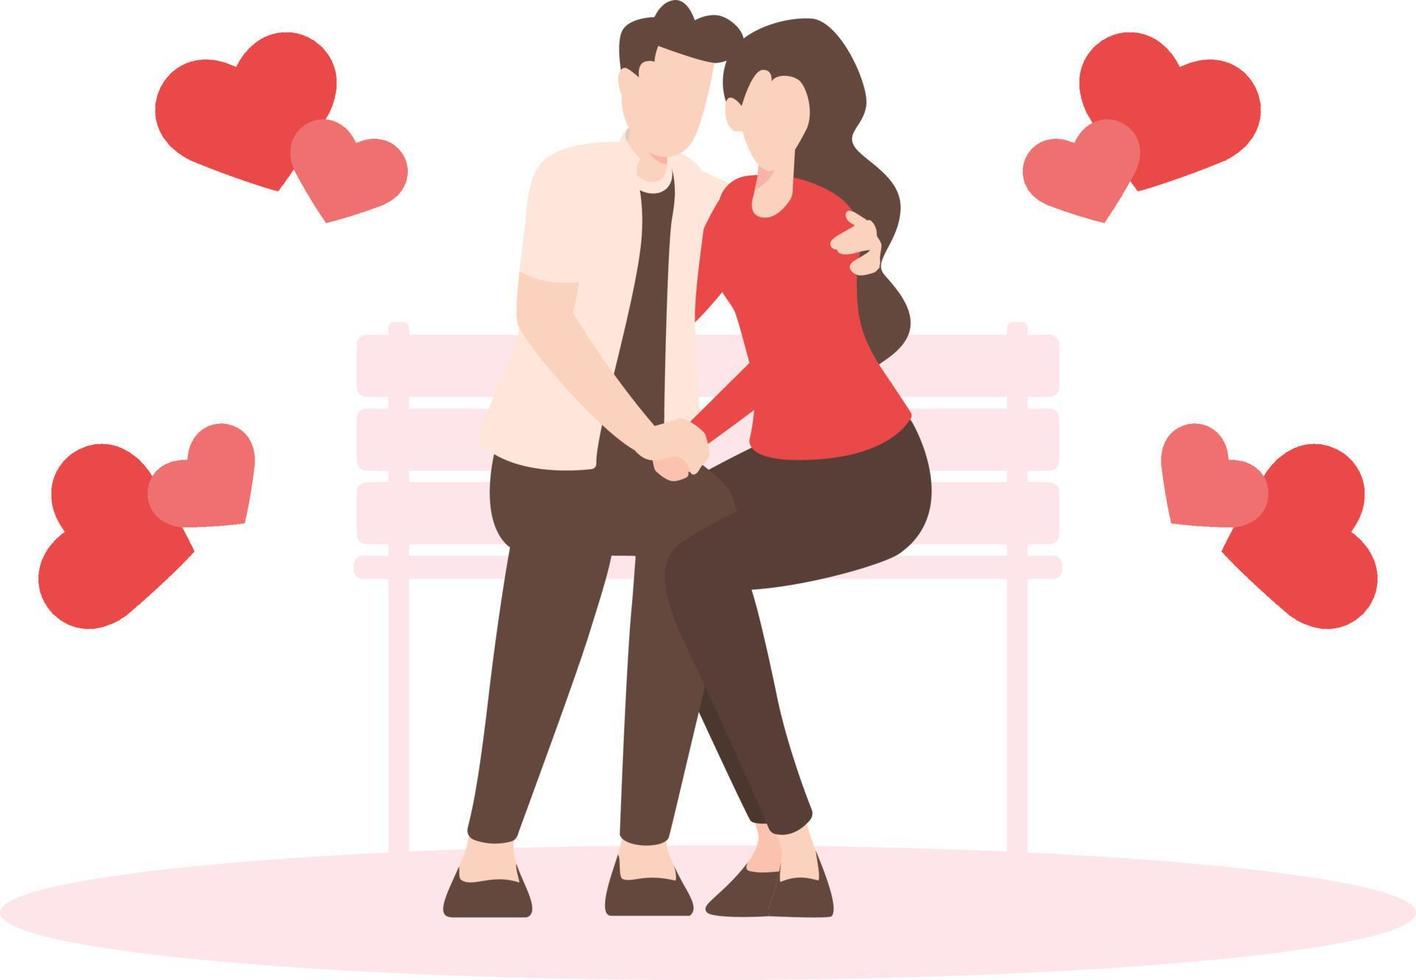 The couple sit on bench and doing romance. vector